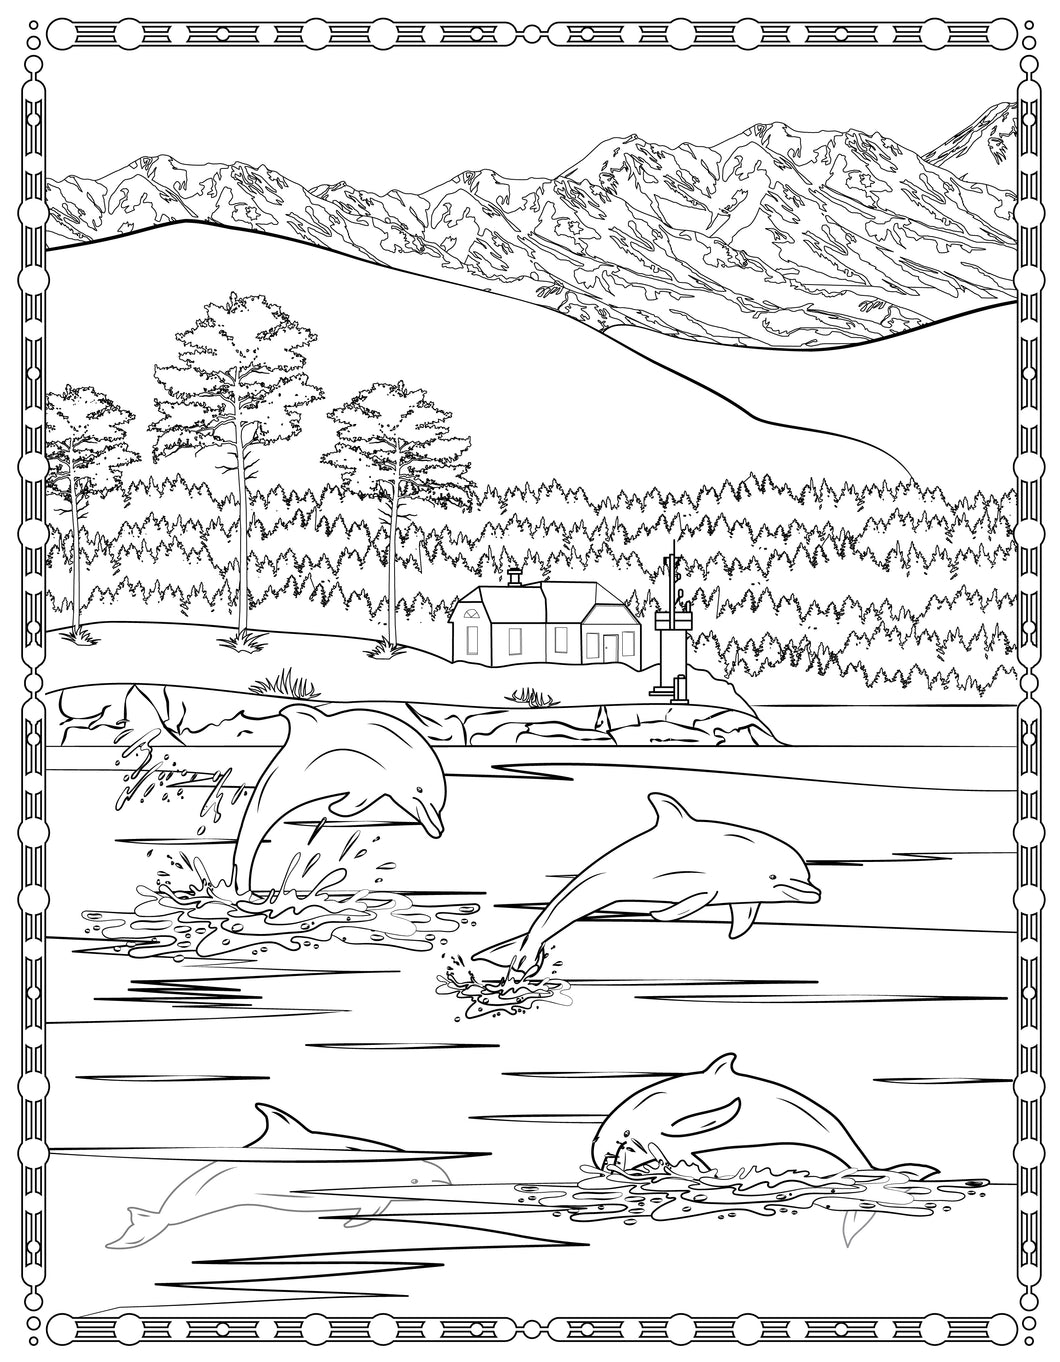 Single Coloring Book Page - Turn Point Lighthouse, Washington - Digital Print-from-Home